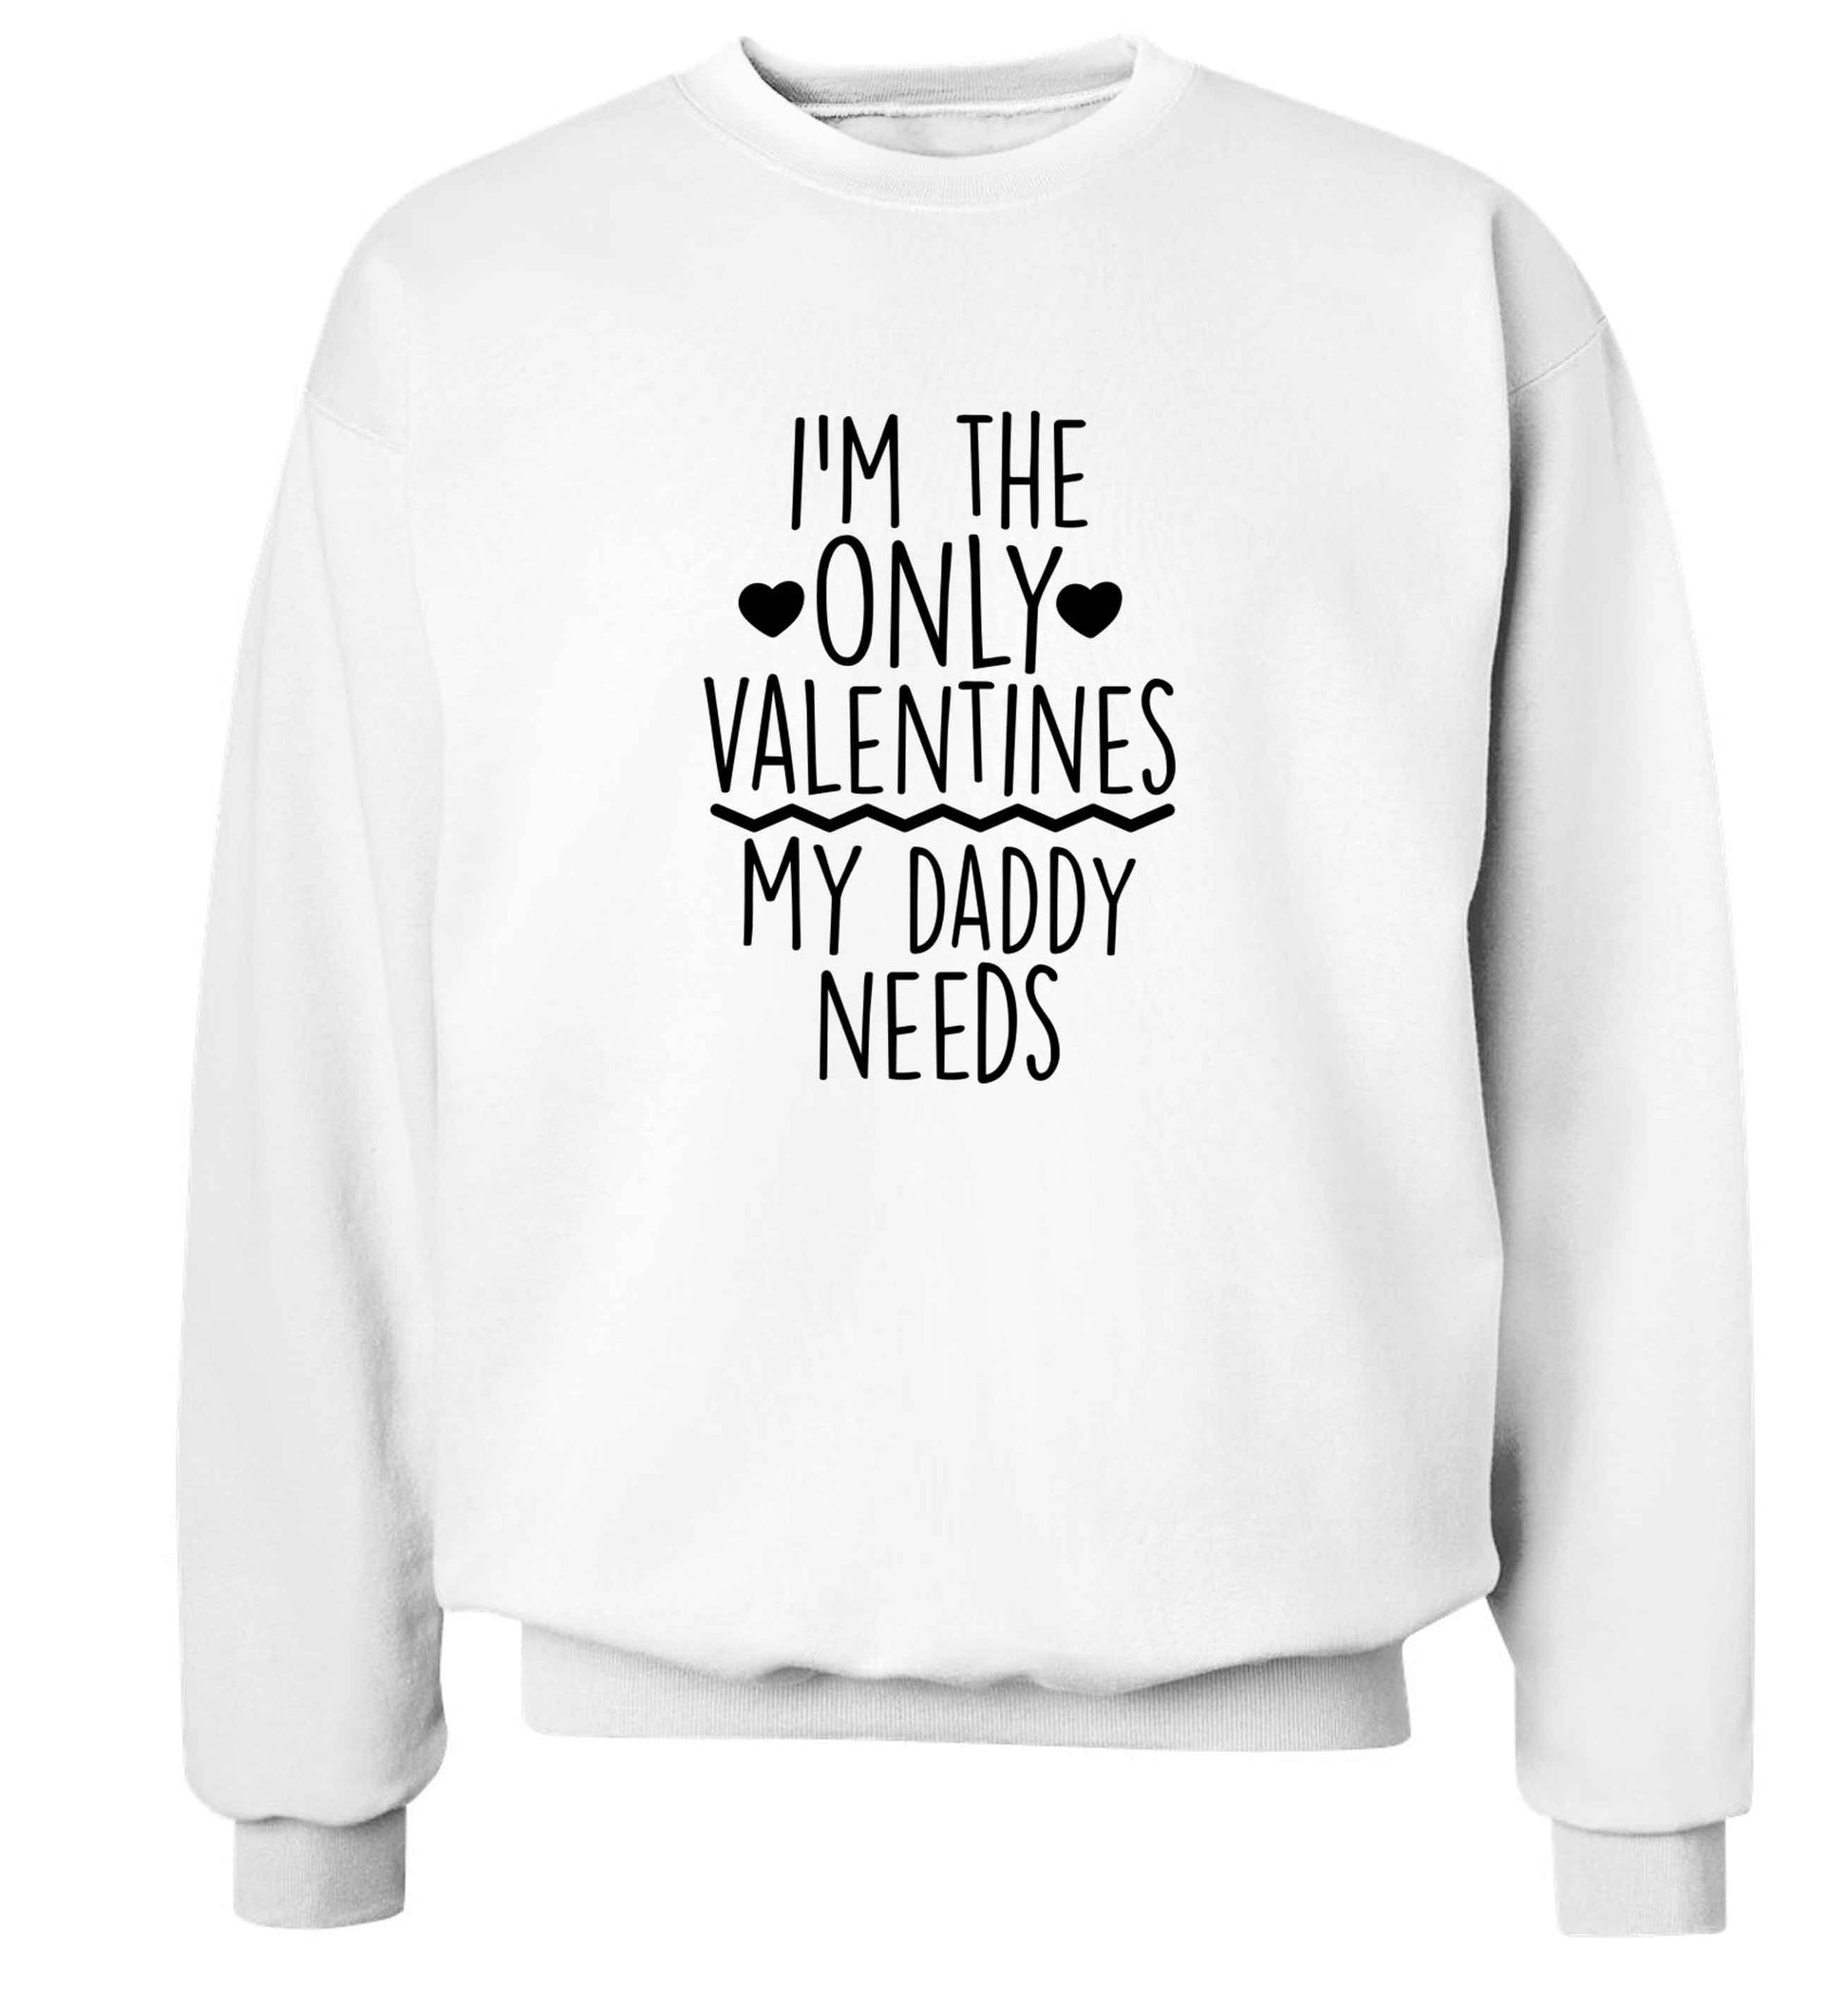 I'm the only valentines my daddy needs adult's unisex white sweater 2XL